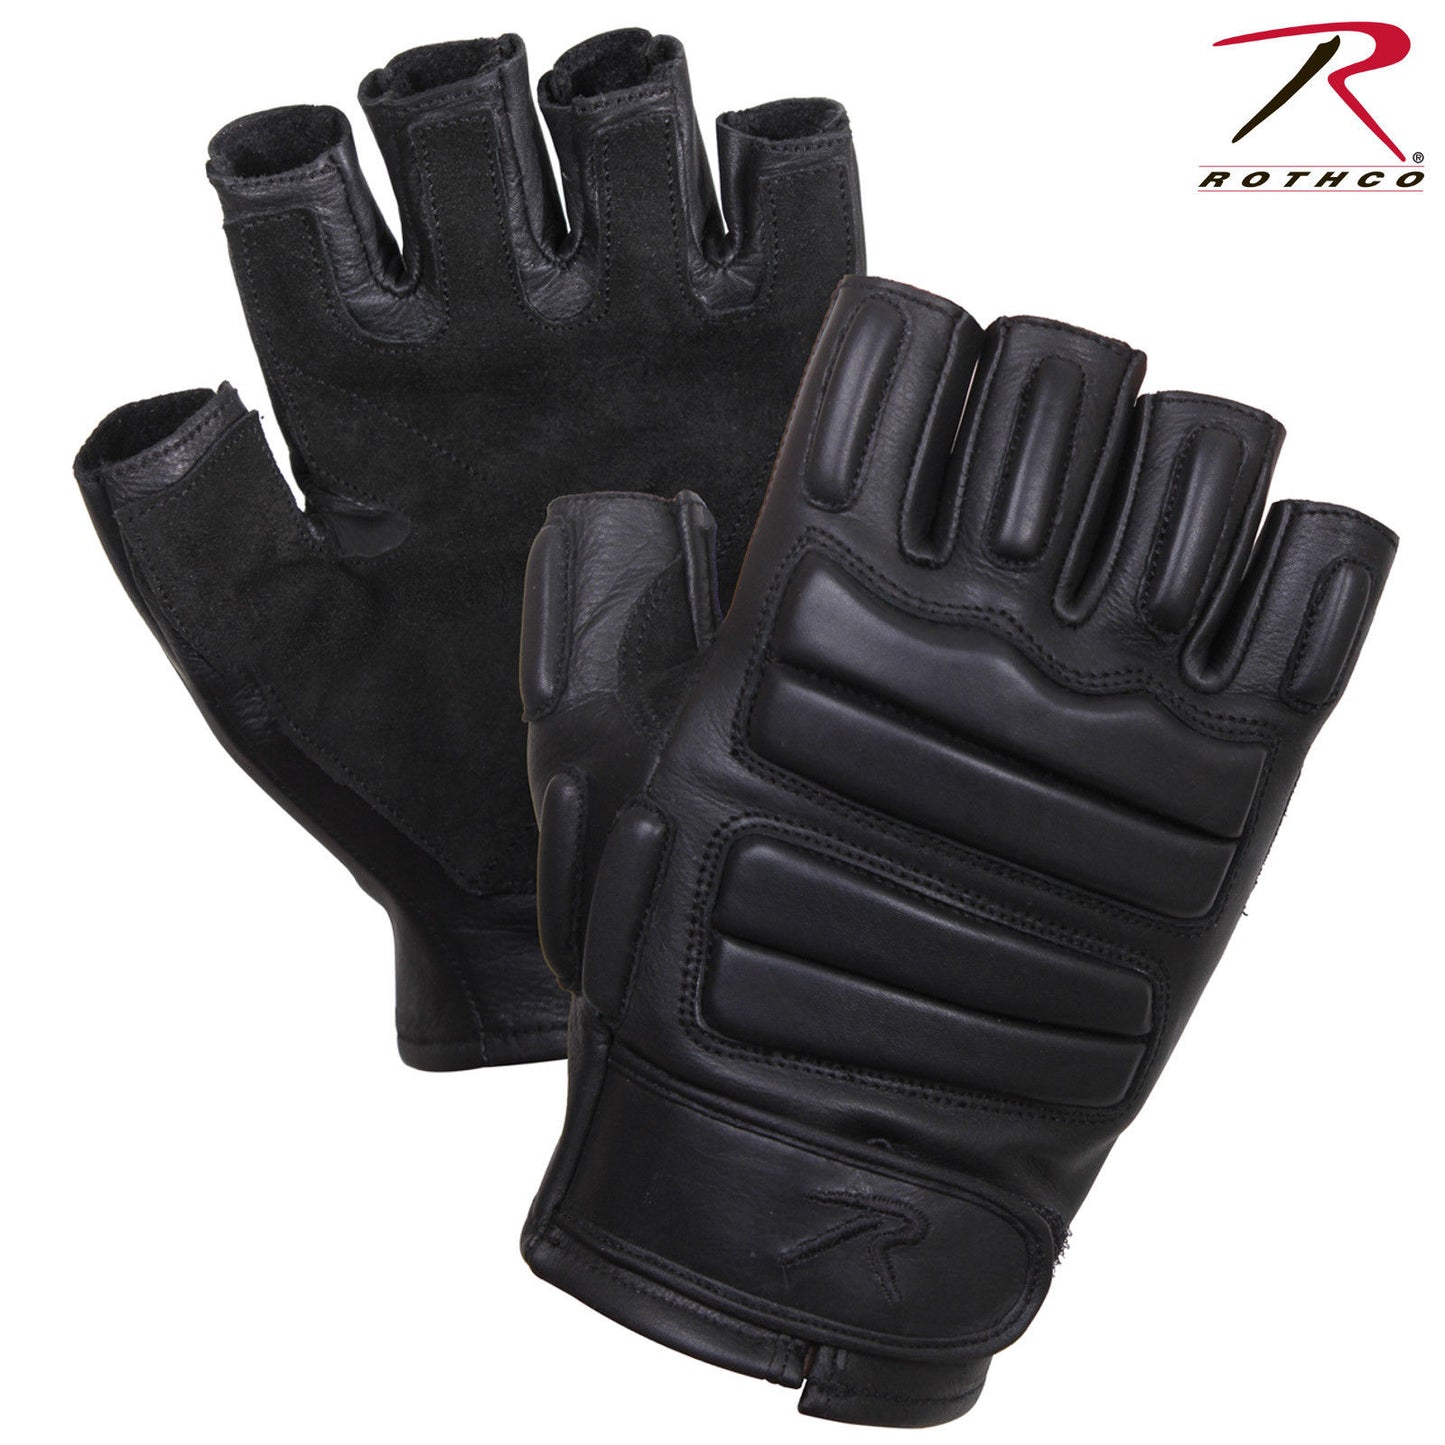 Rothco Black Tactical Fingerless Padded Gloves - Leather & Suede Gloves 2817